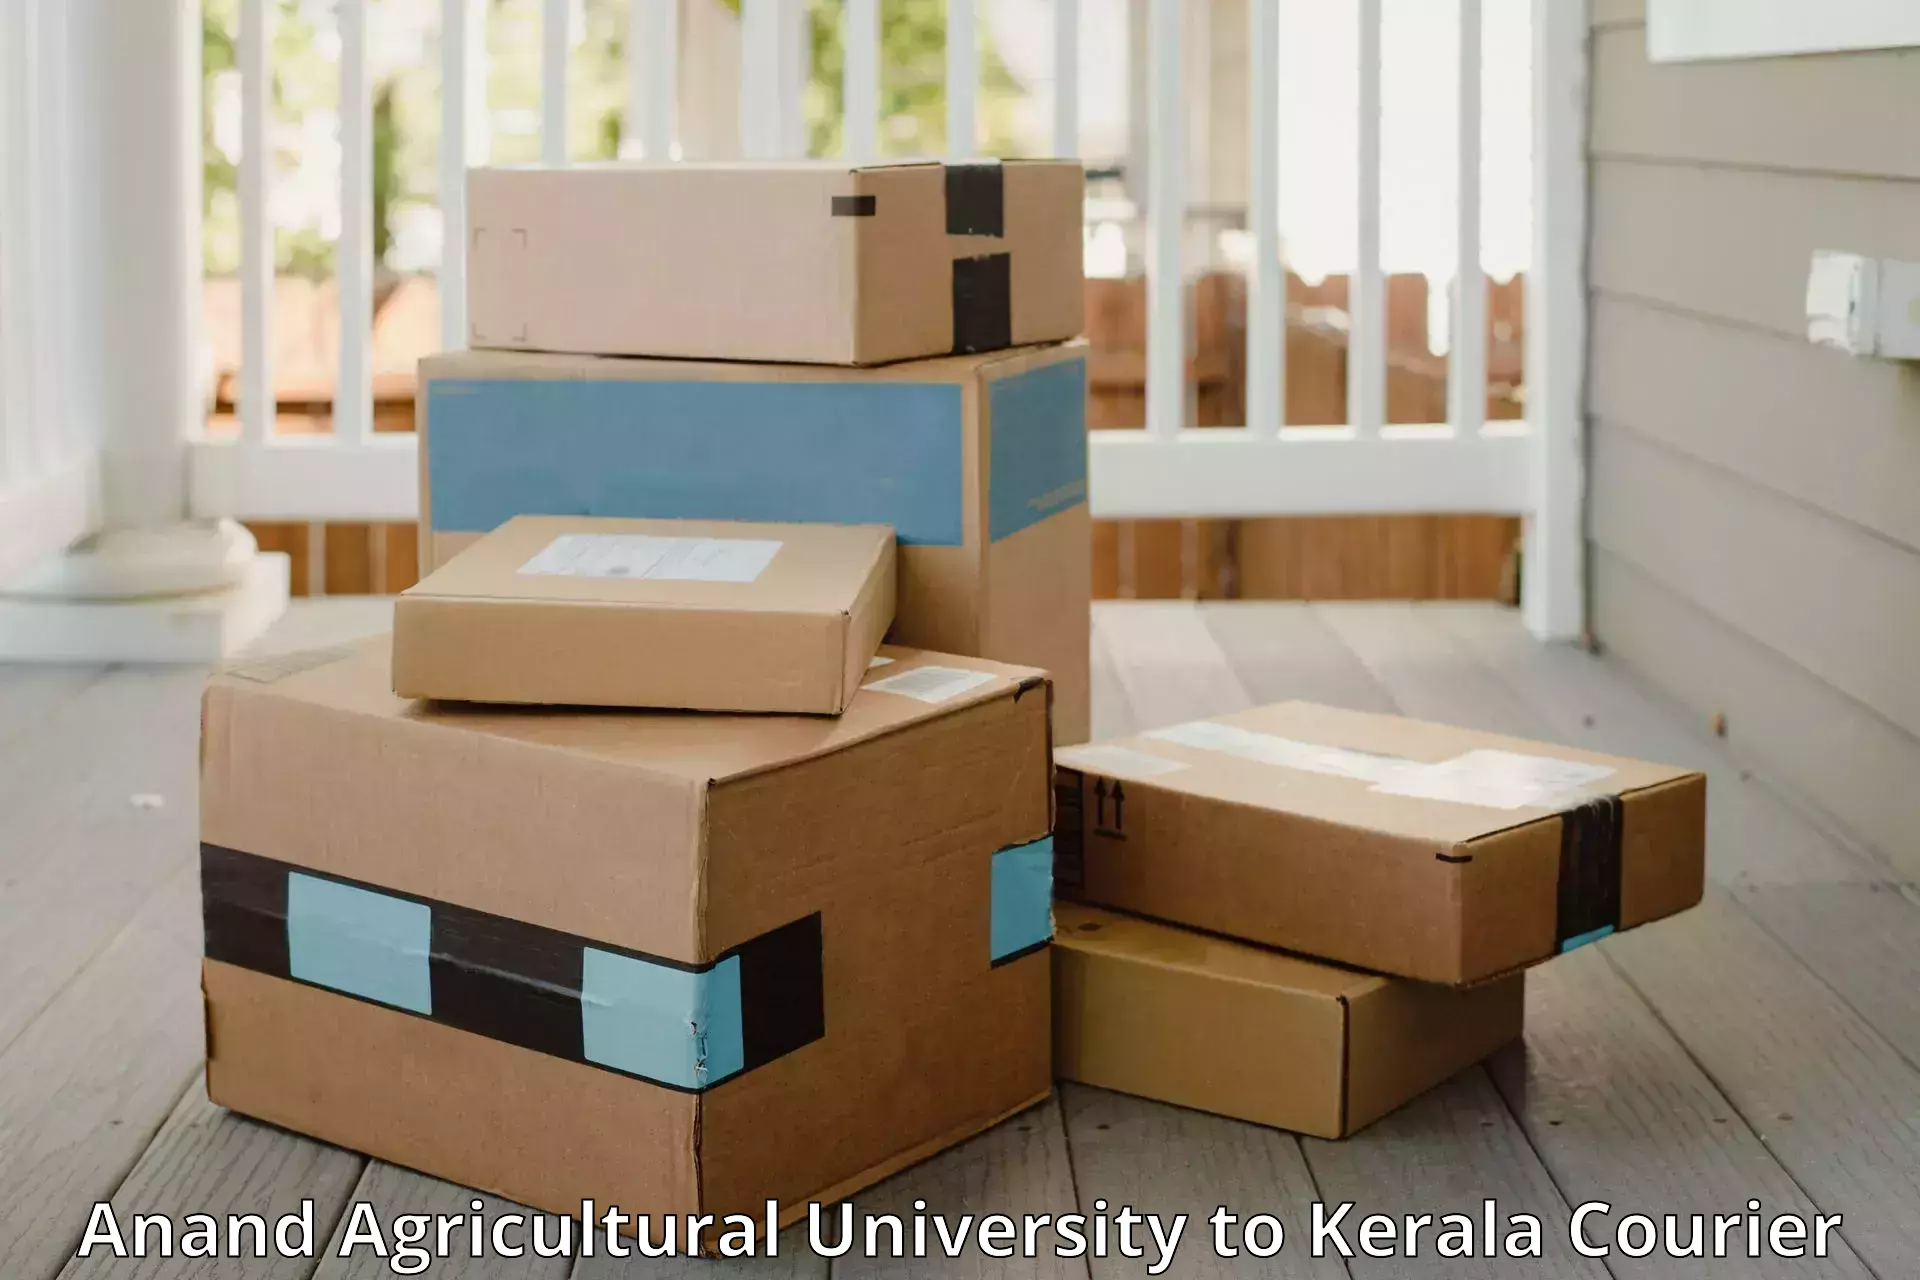 Express baggage shipping Anand Agricultural University to Kerala